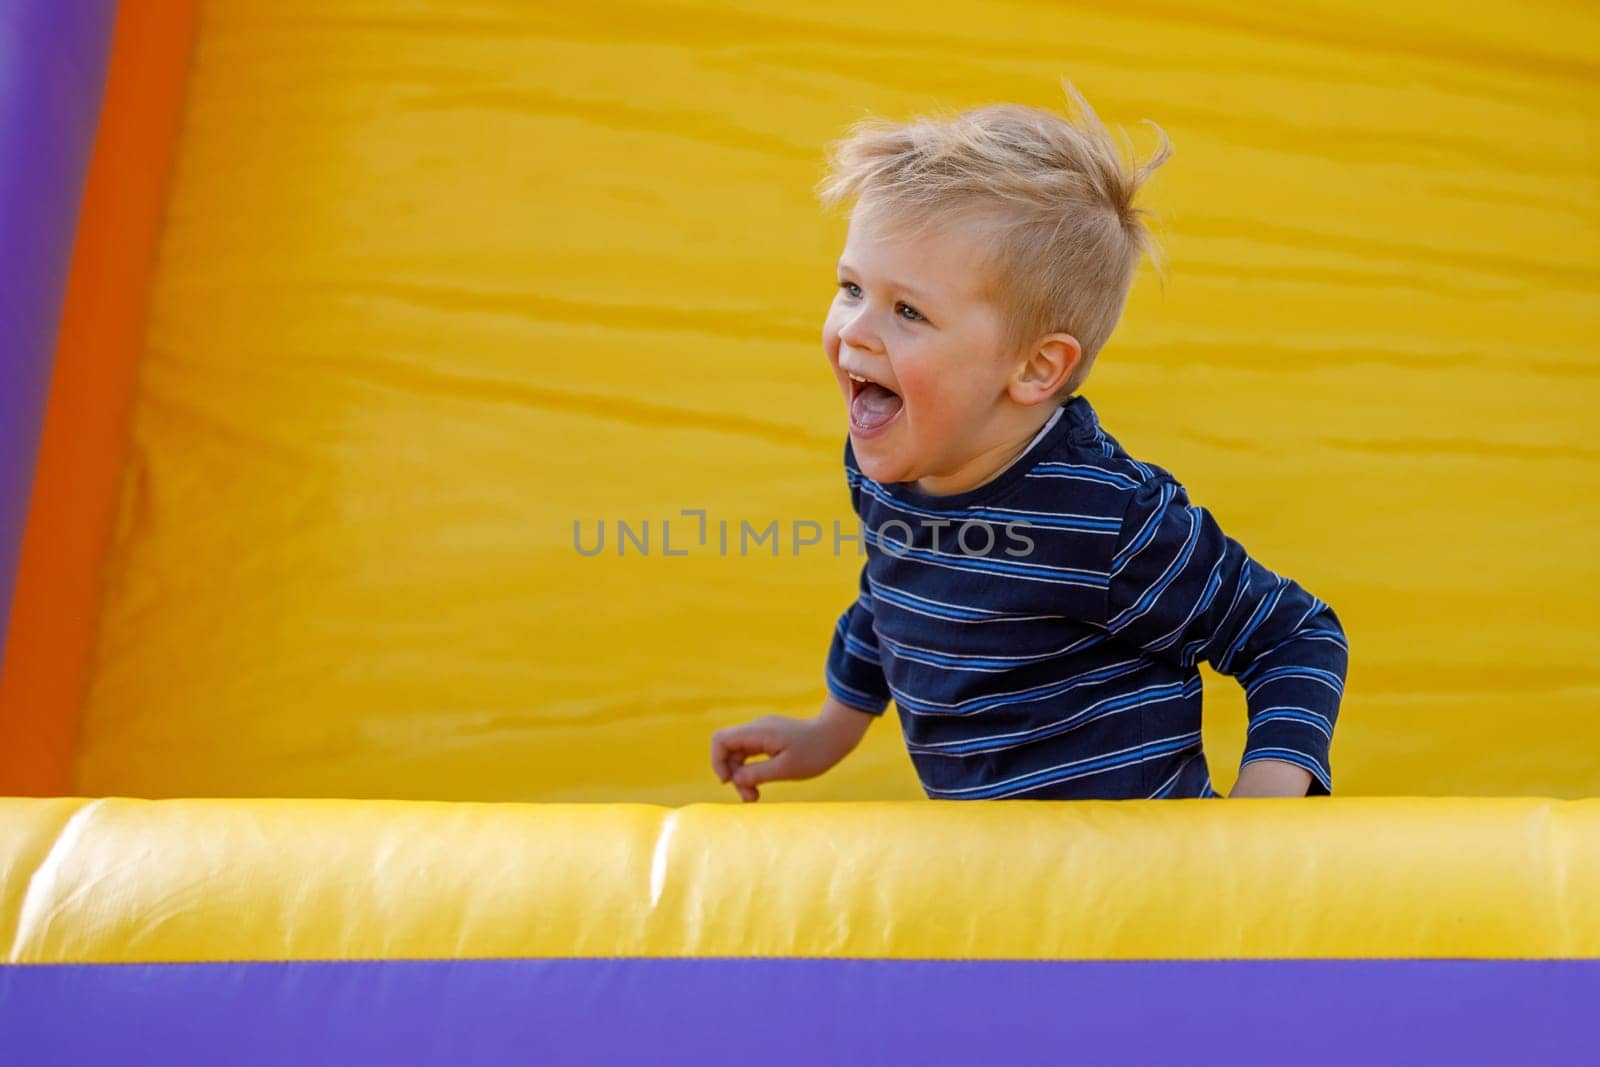 Stormy child be naughty on playground trampoline. Kids jumping attraction.